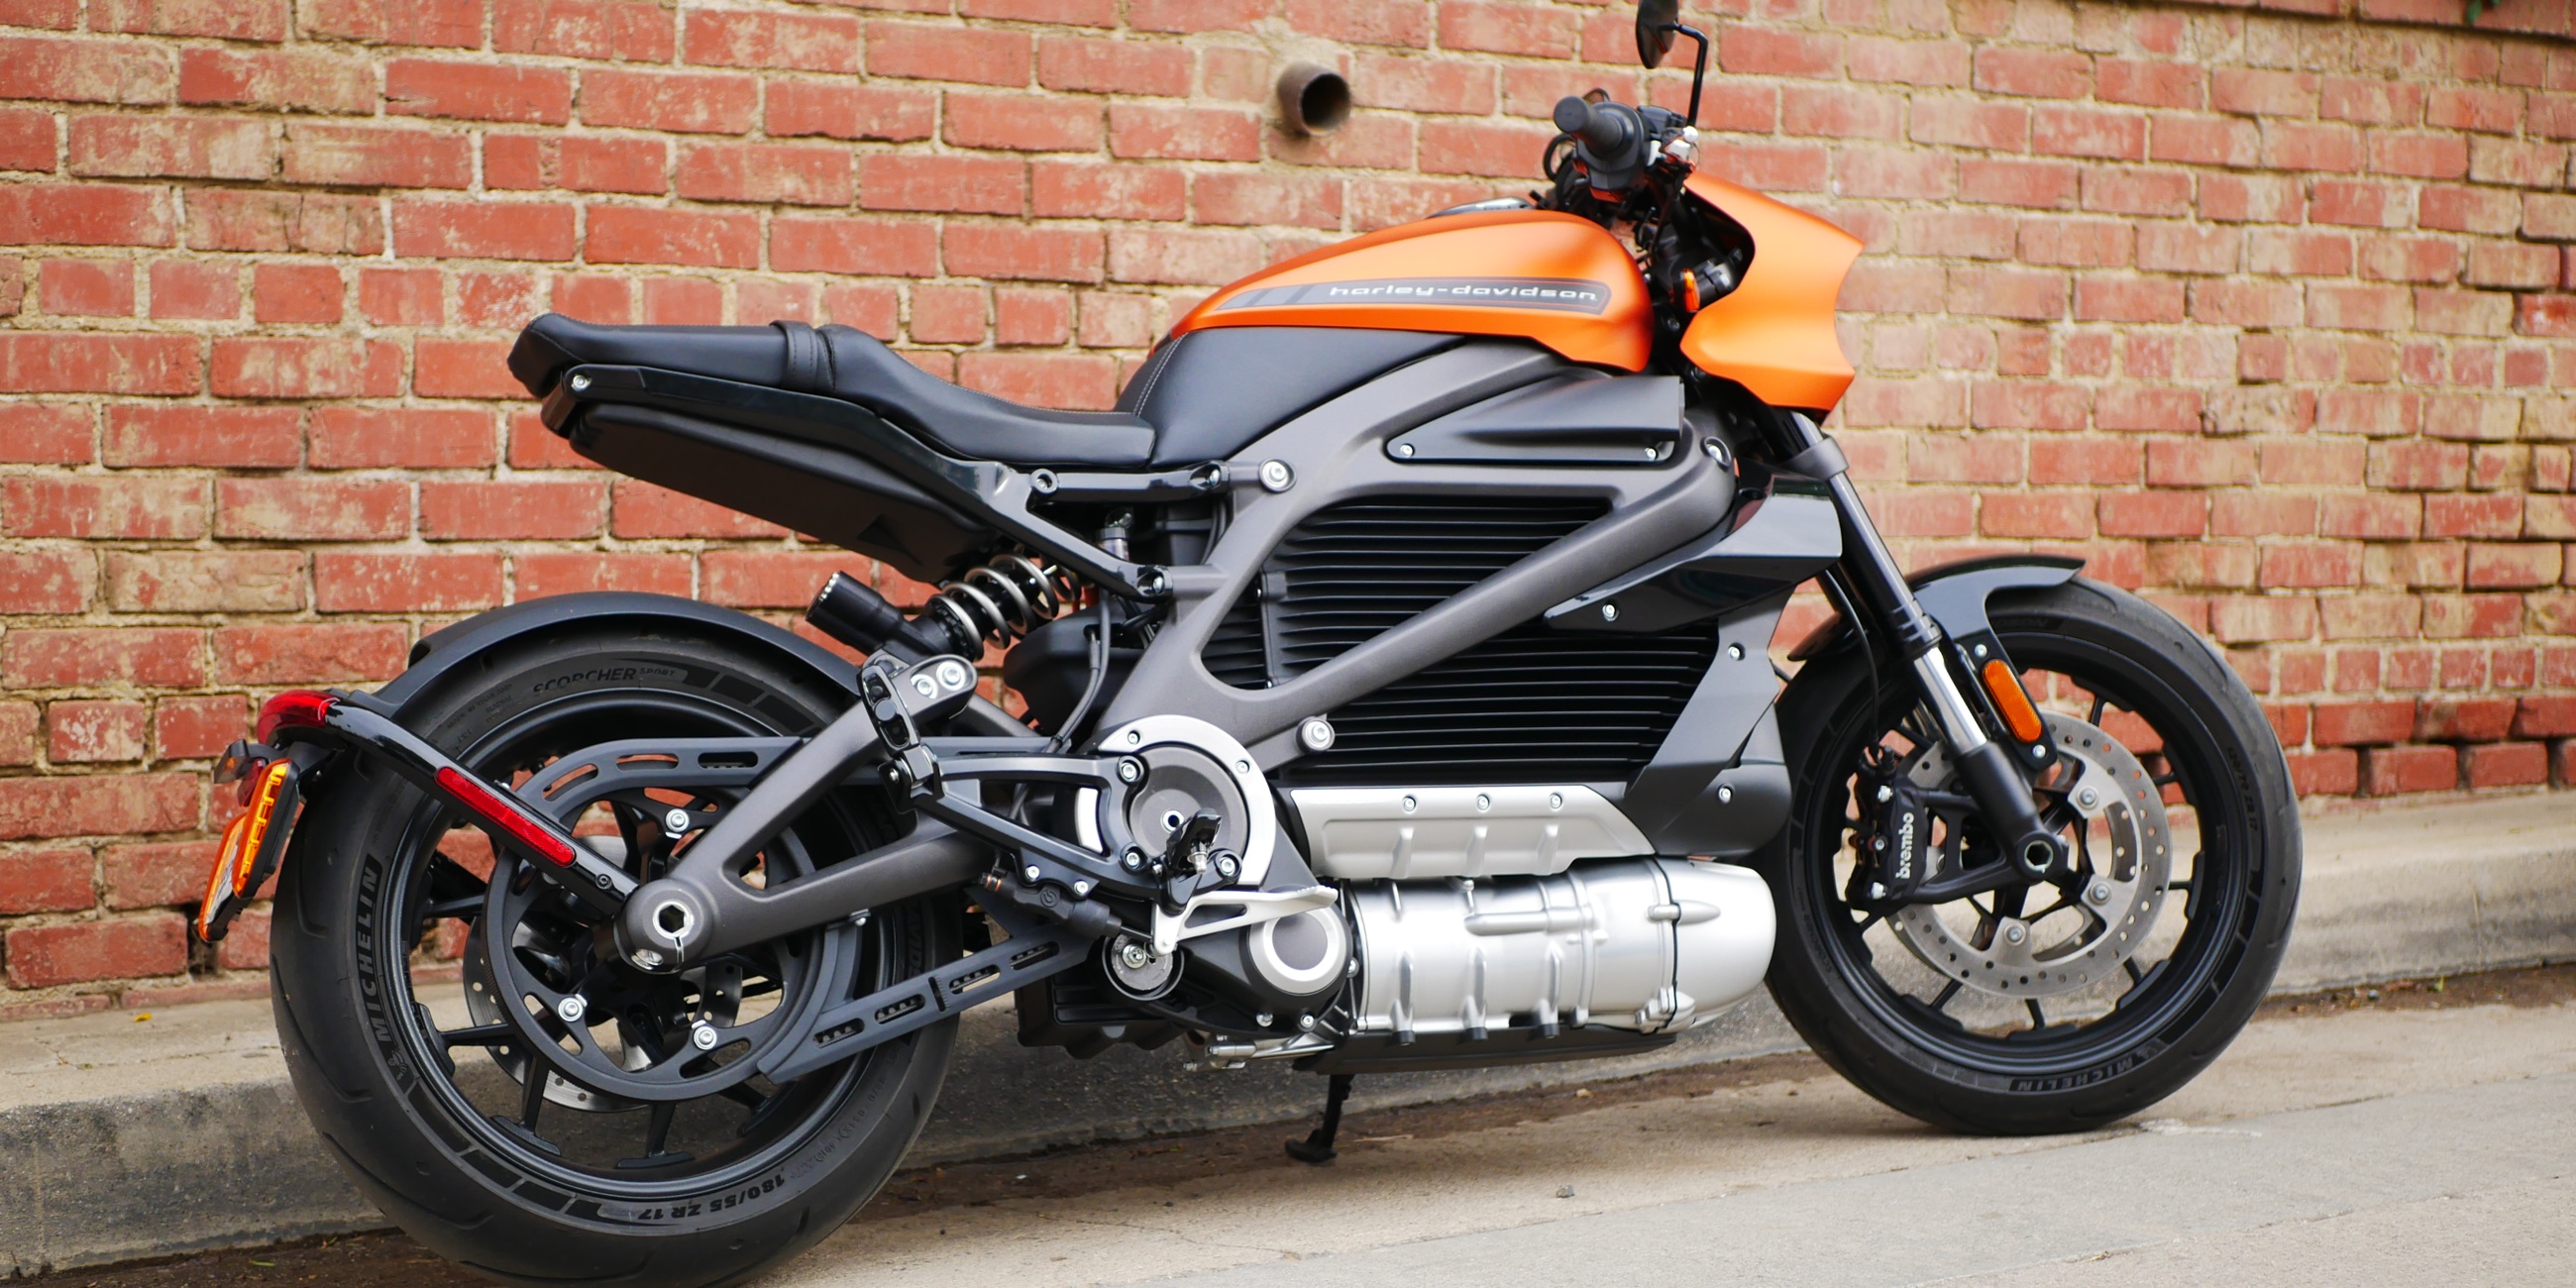 Harley-Davidson LiveWire electric motorcycle review: The real deal